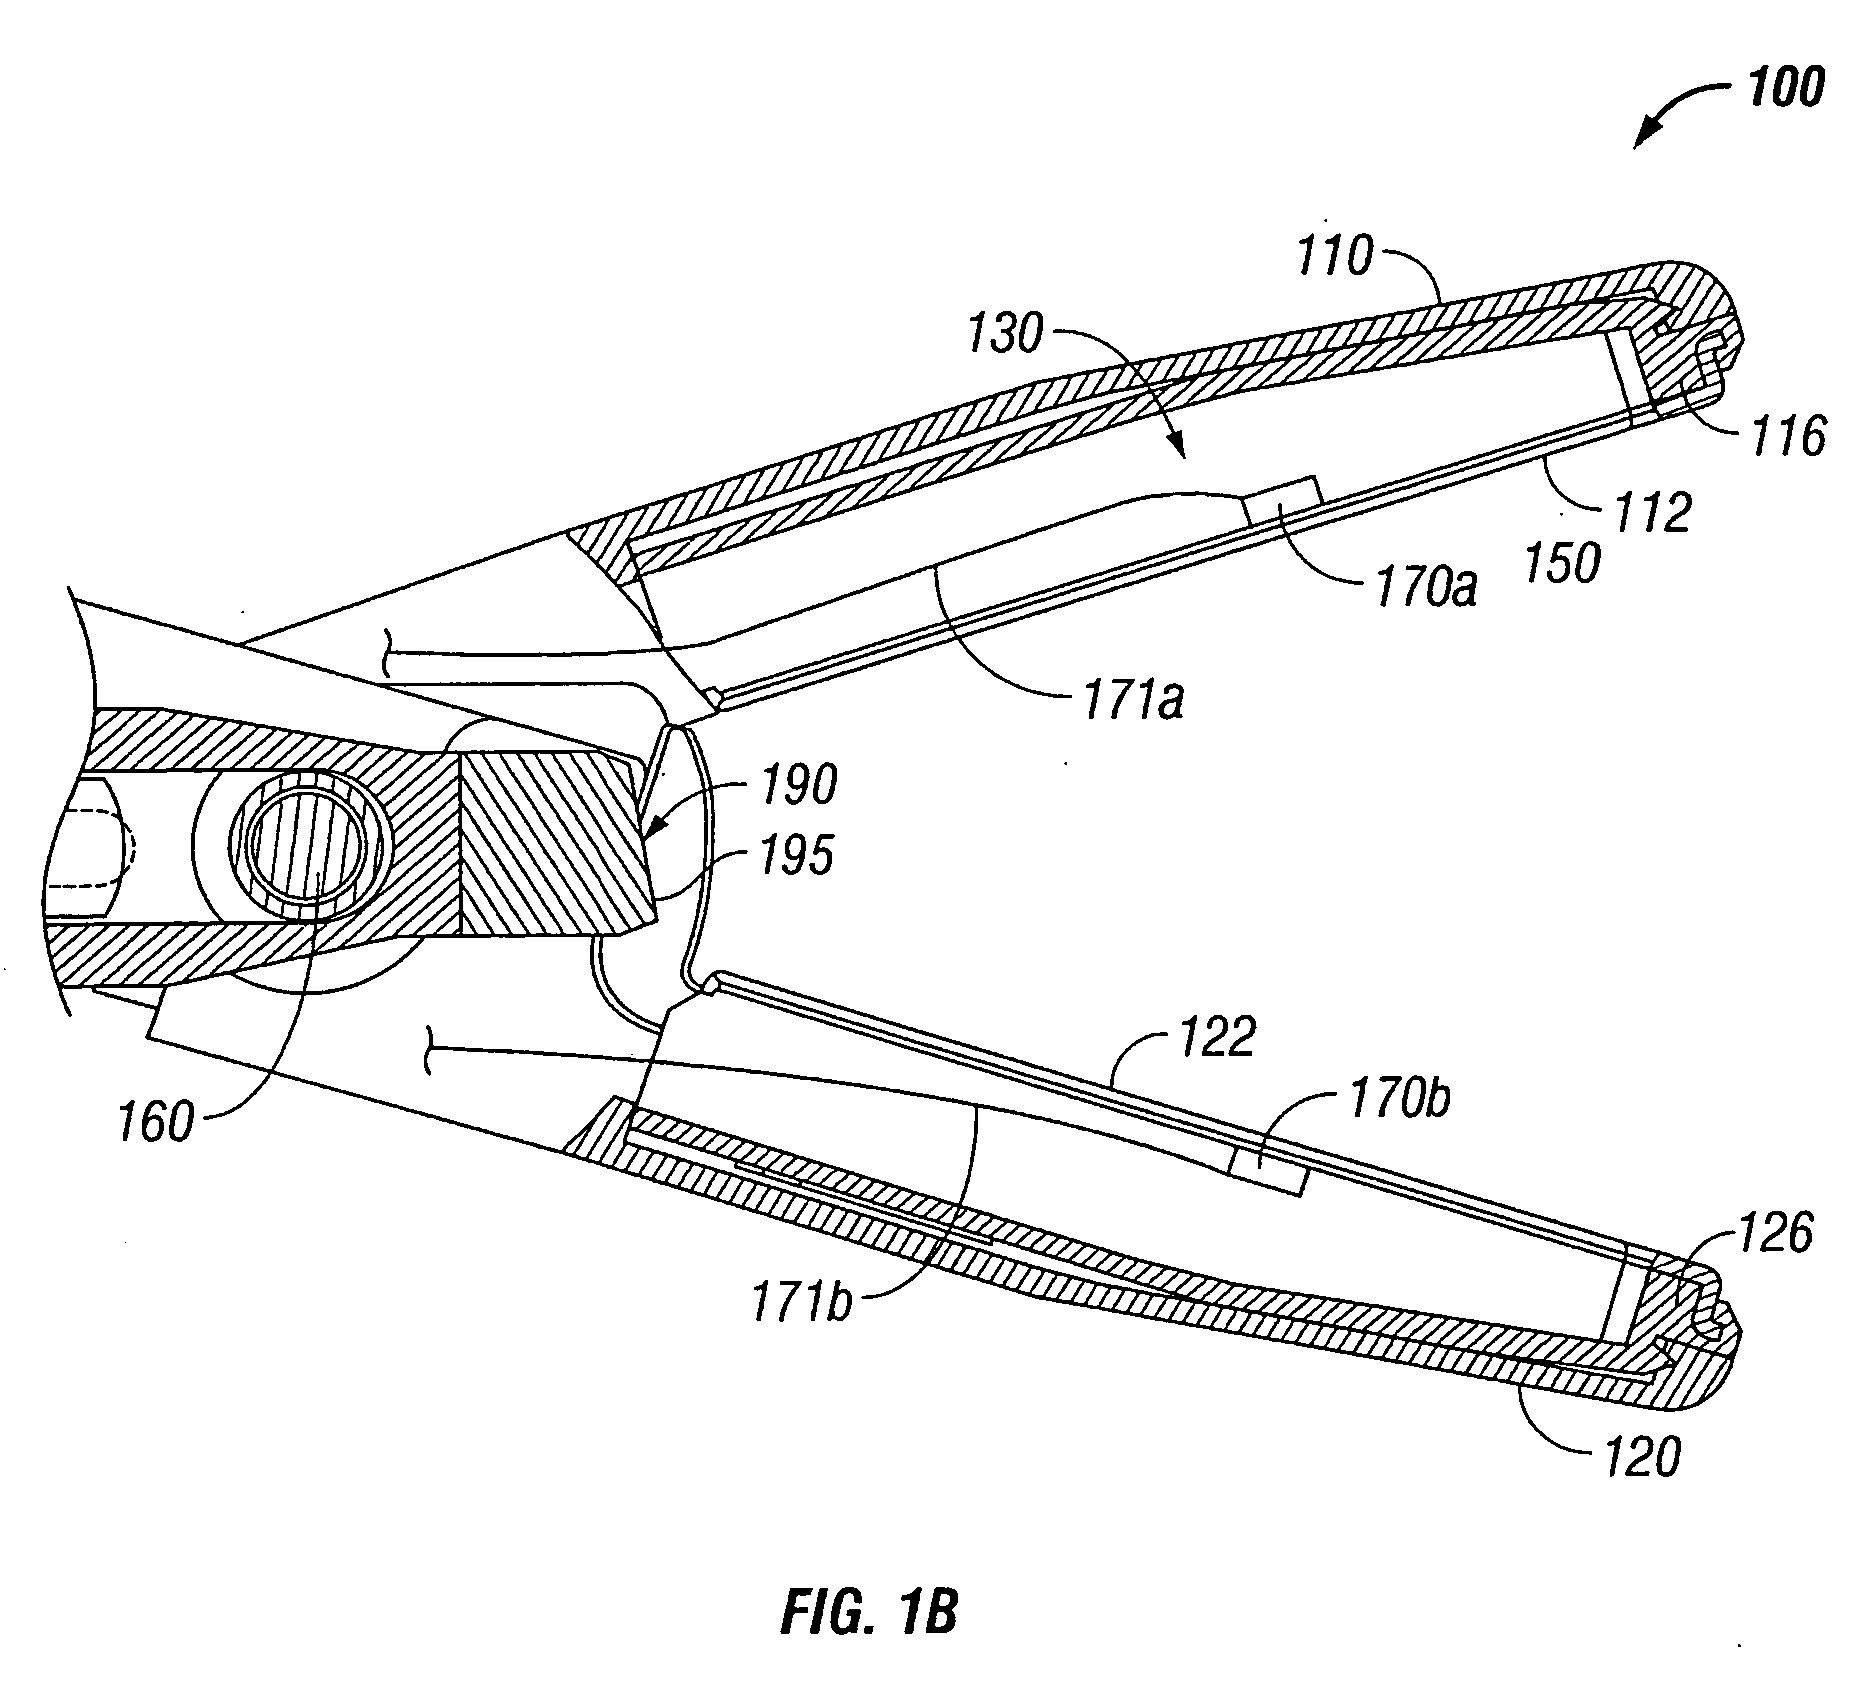 System and method for controlling electrode gap during tissue sealing